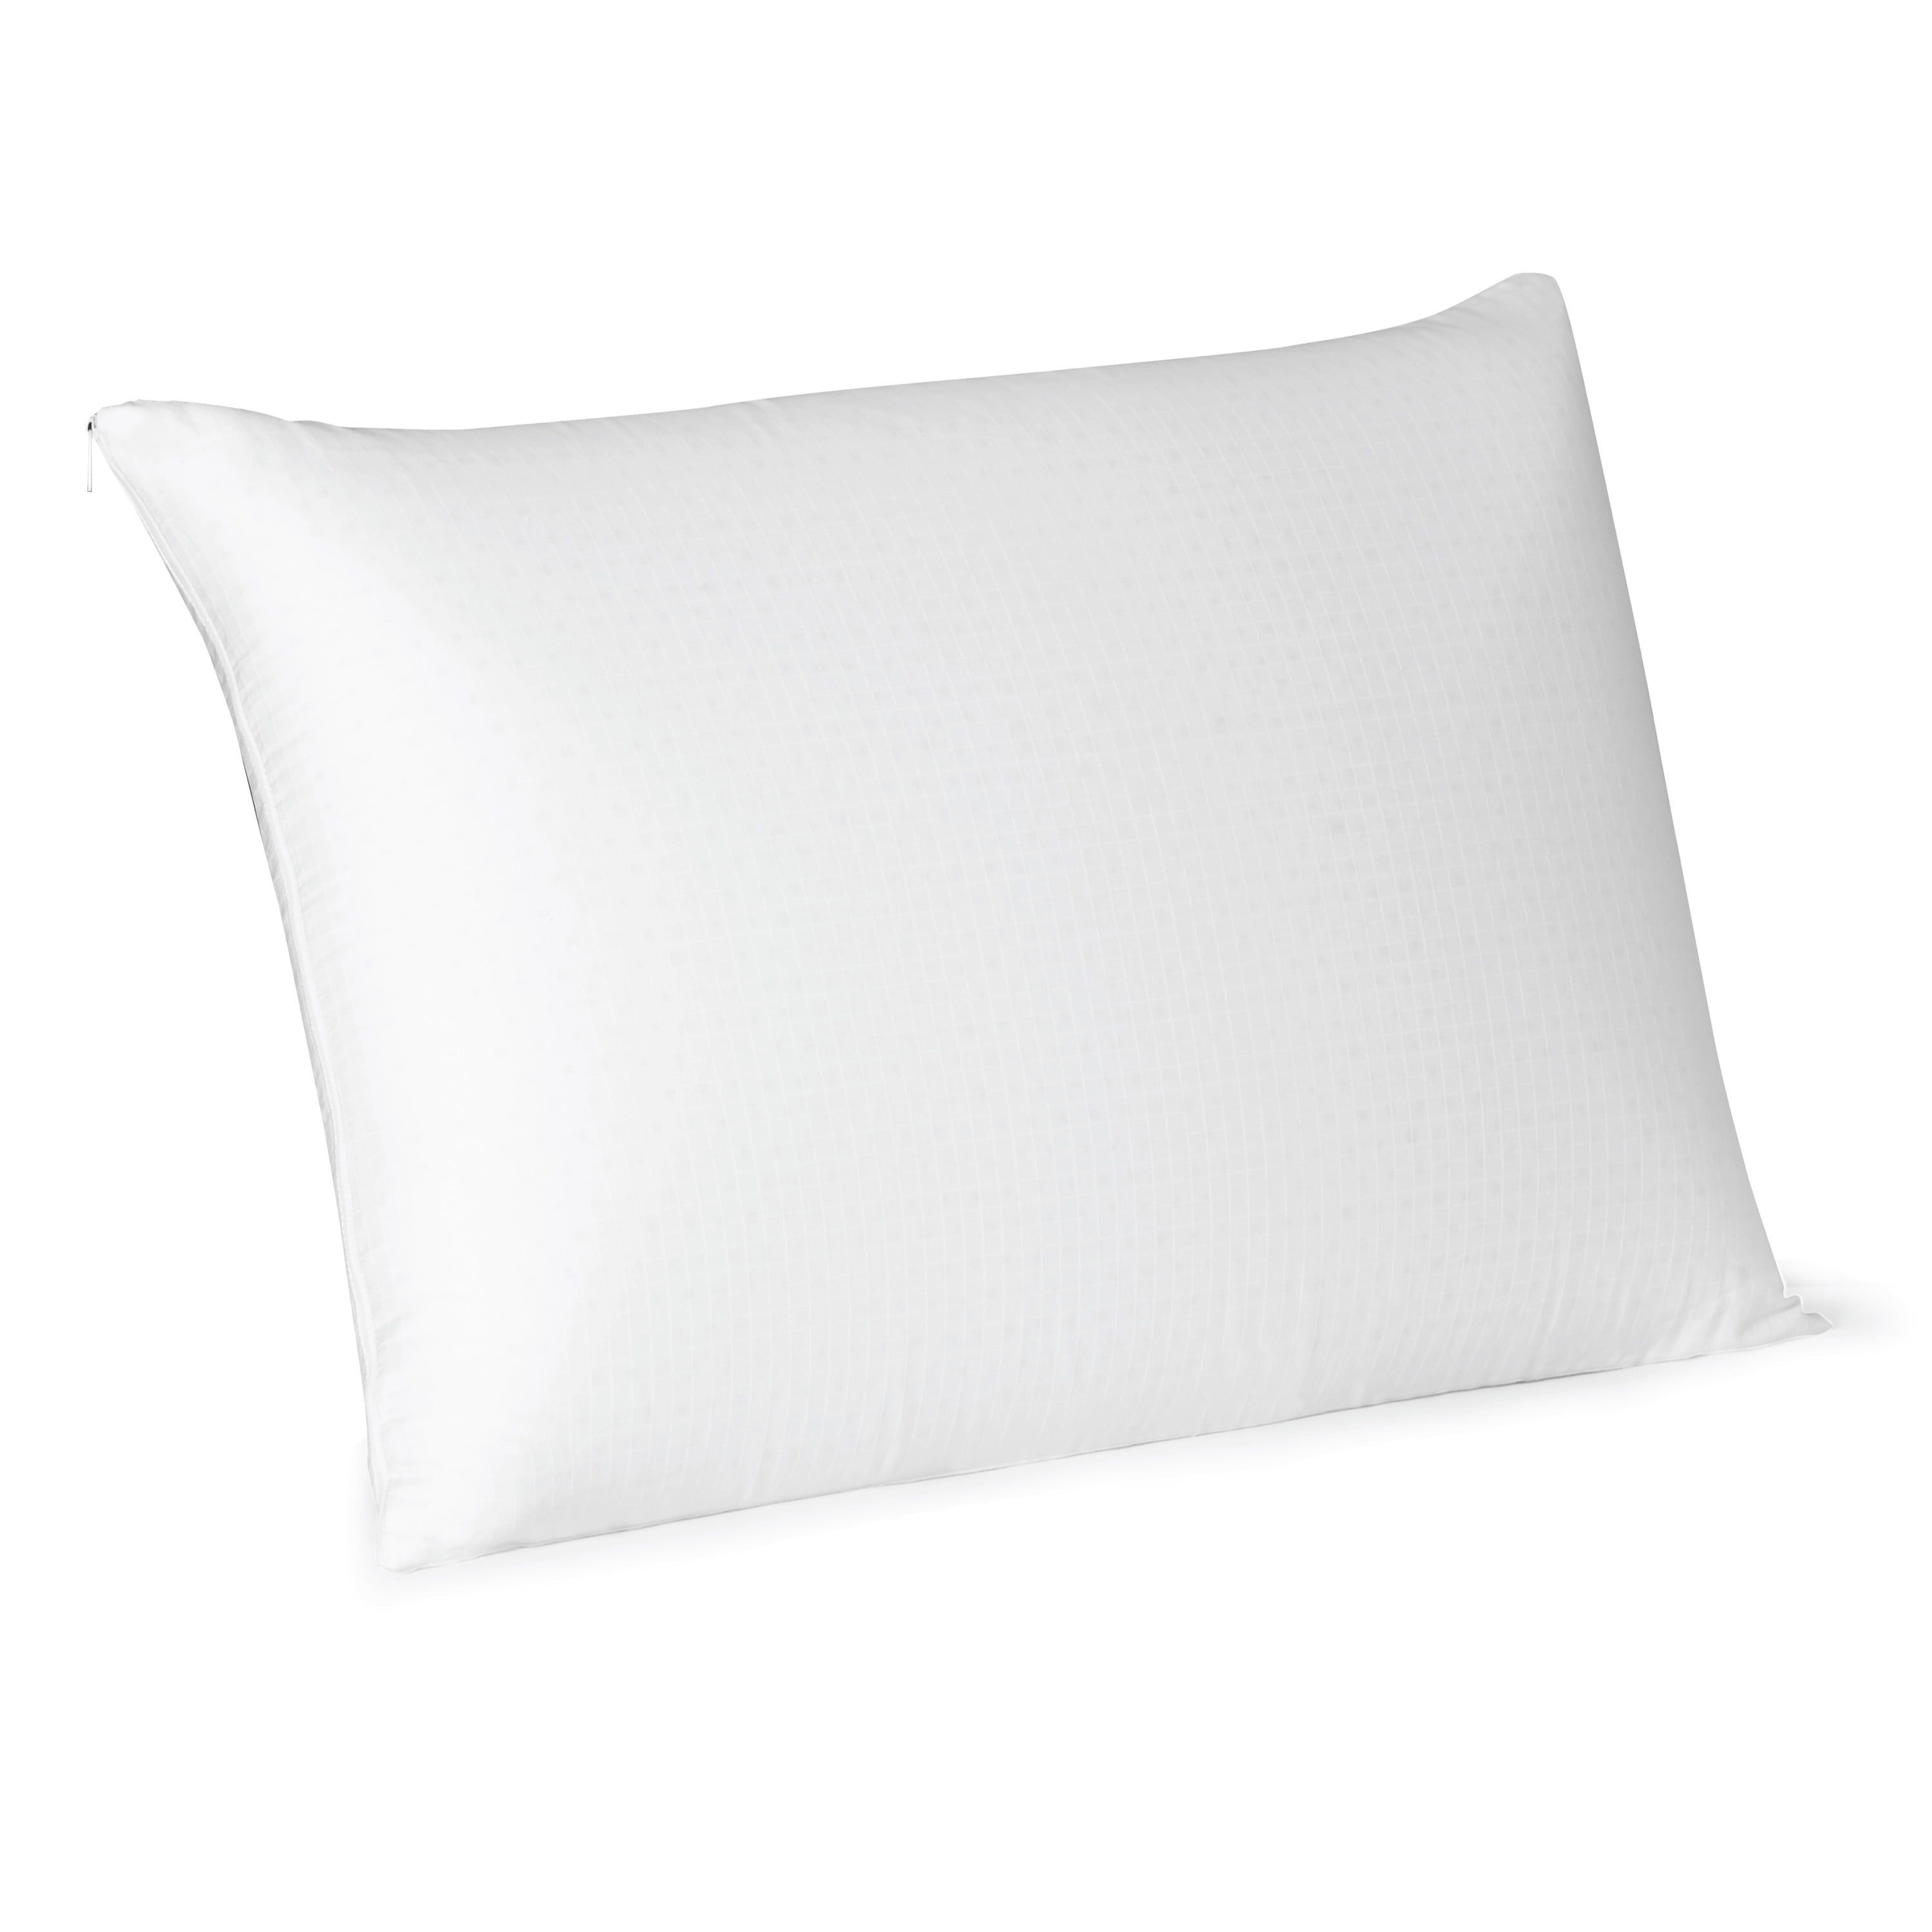 Beautyrest Latex Pillow With Removable Cover In Multiple Sizes Walmart Com Walmart Com